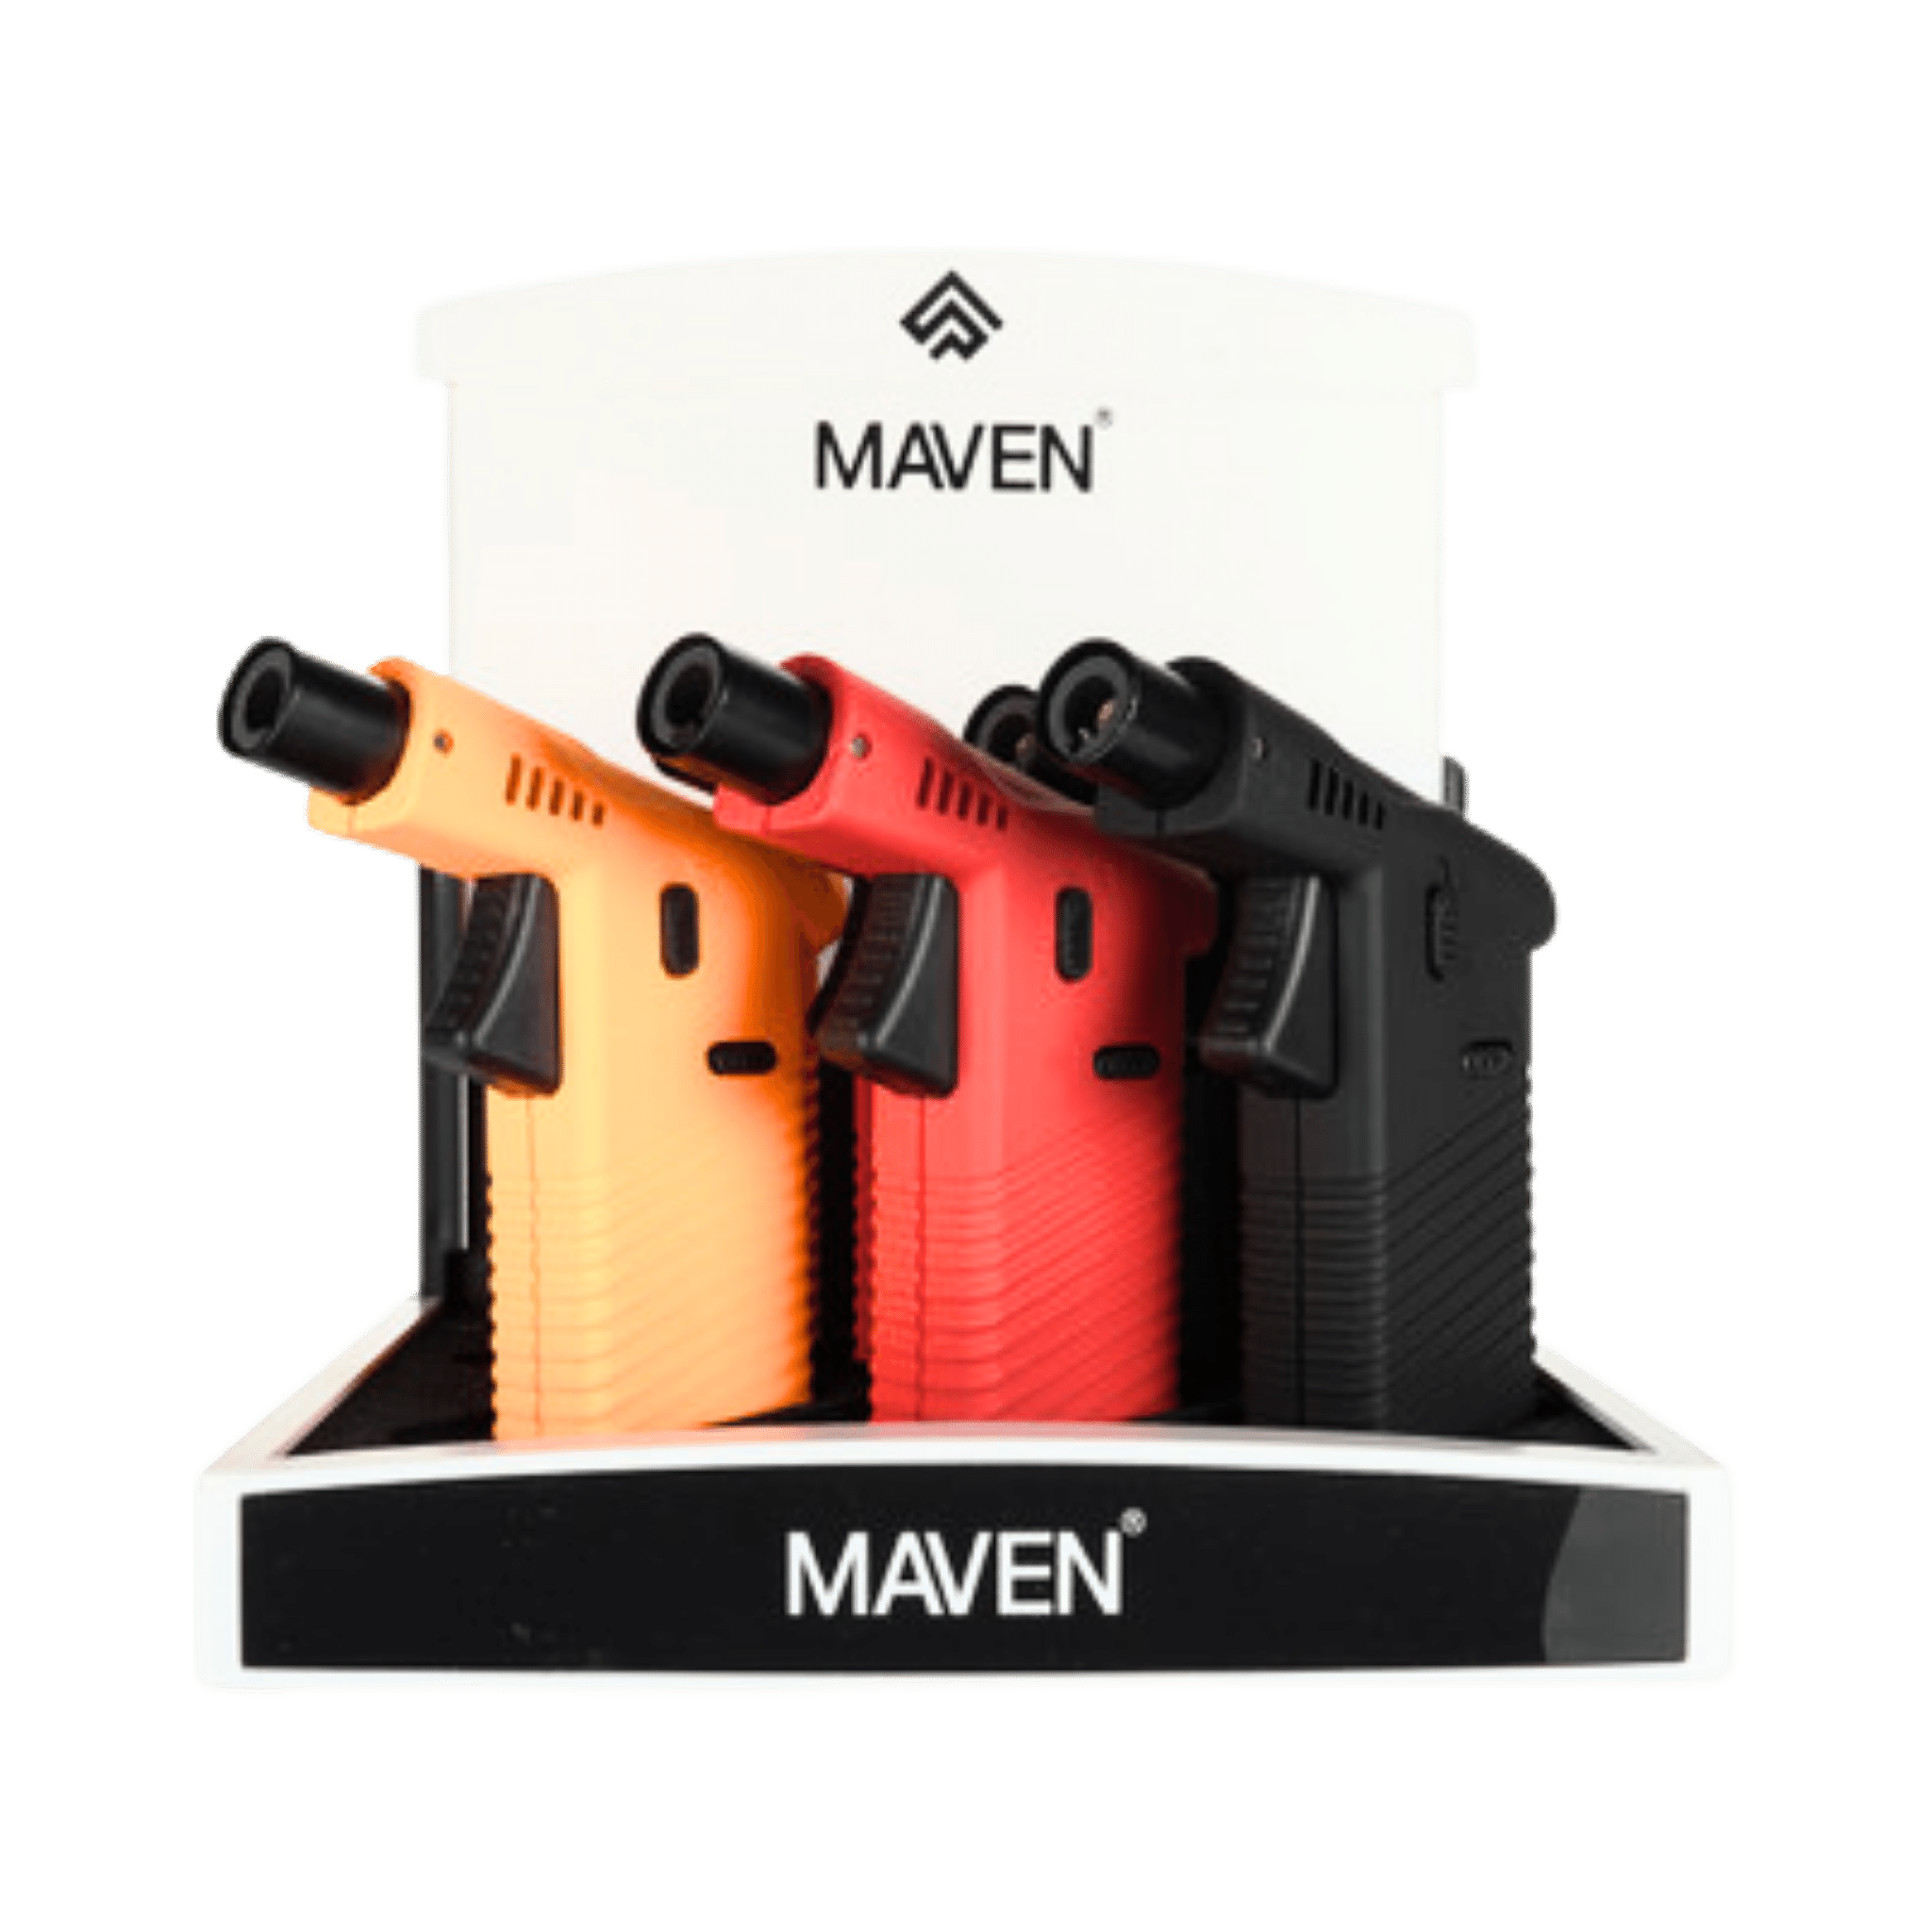 Maven Cannon Torch Lighter (6 pack)